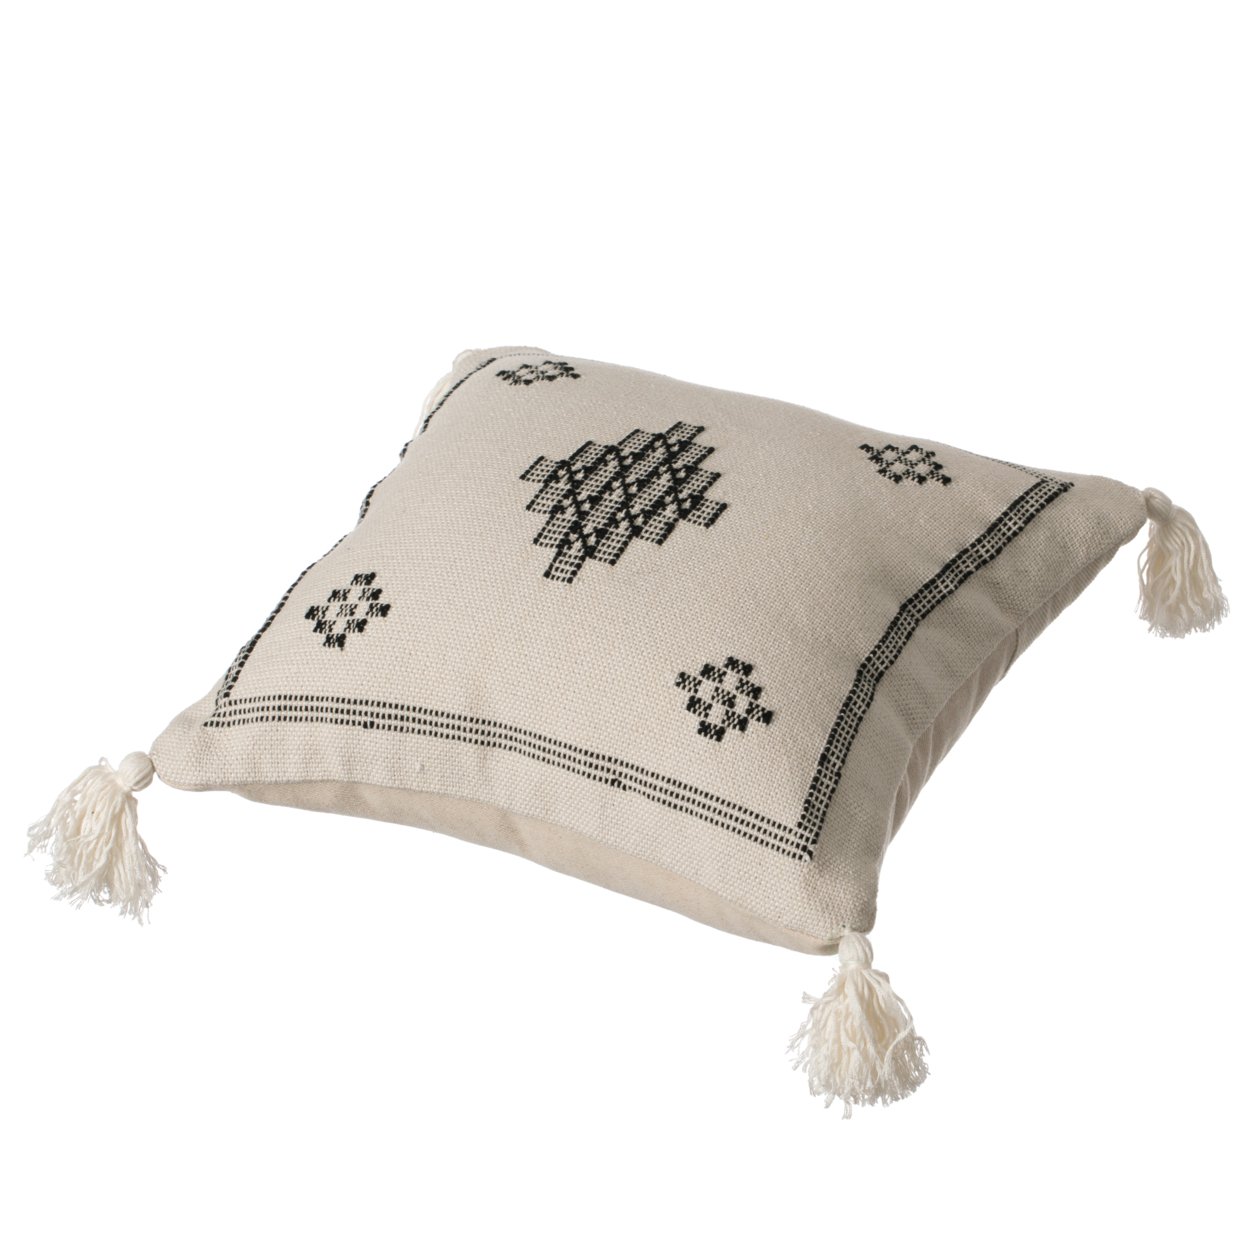 Deerlux 16" Throw Pillow Cover with Southwest Tribal Pattern and Corner Tassels